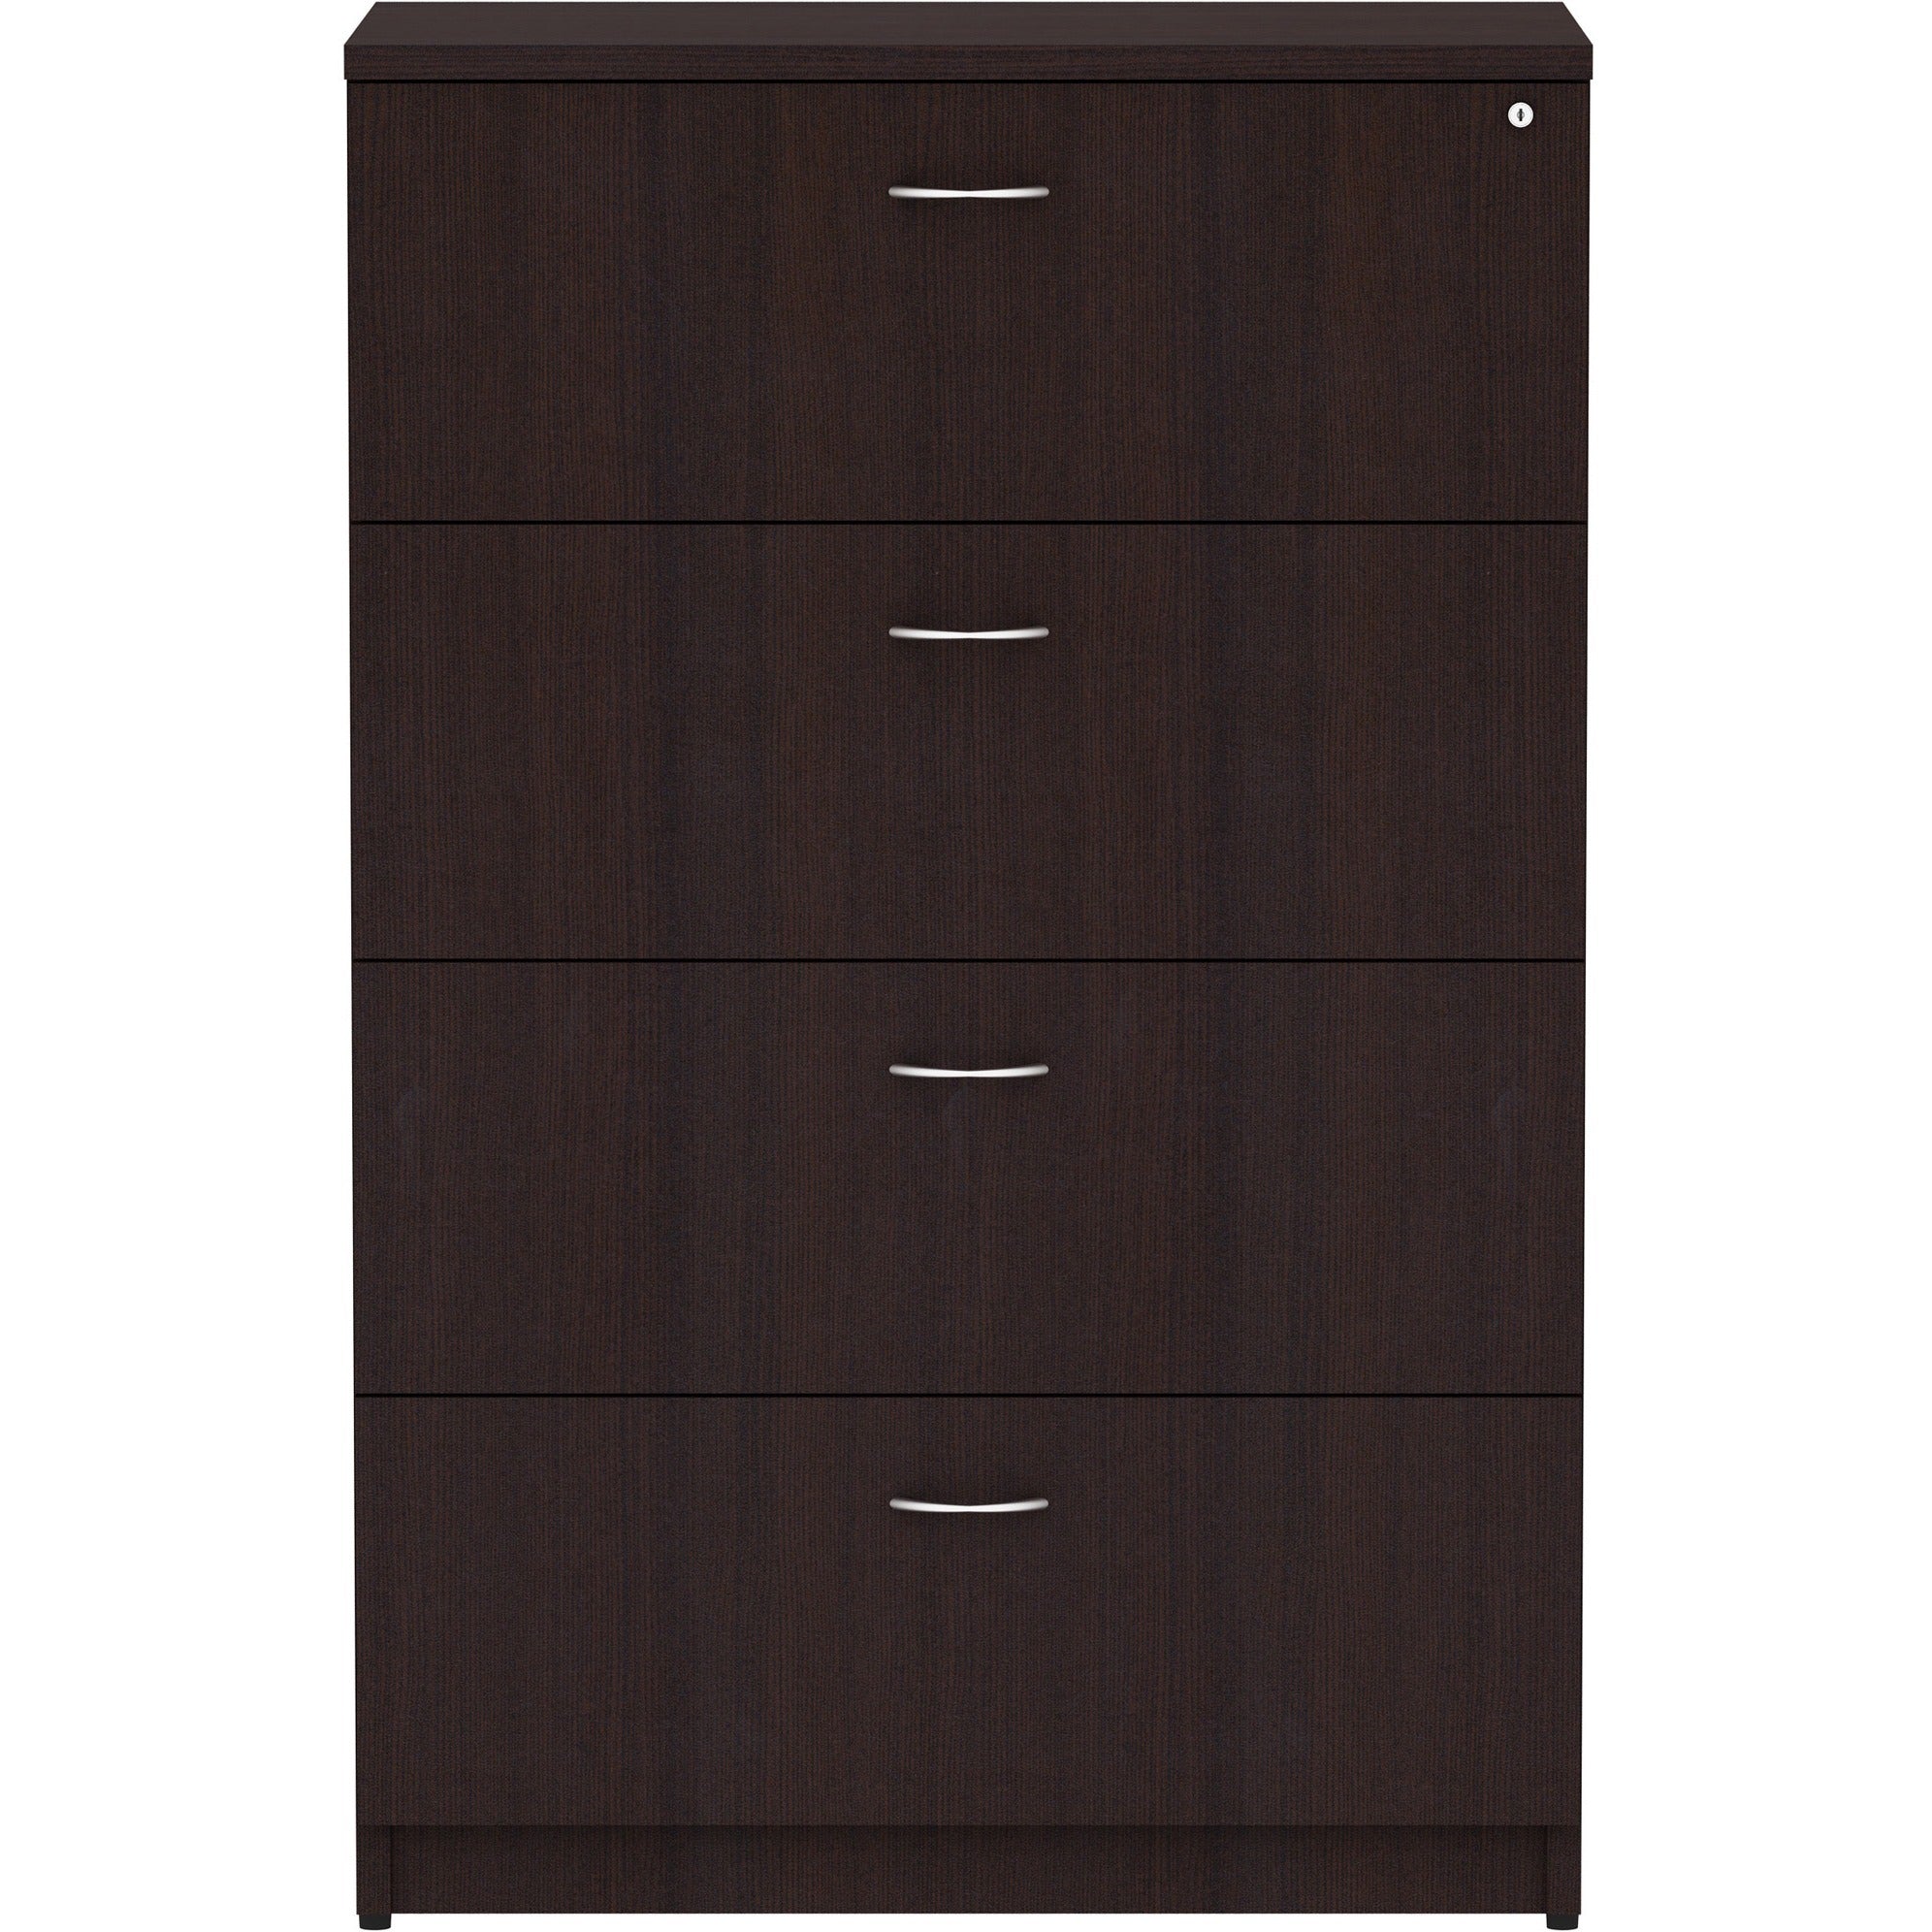 lorell-essentials-series-4-drawer-lateral-file-355-x-22548-lateral-file-1-top-4-x-file-drawers-finish-espresso-laminate_llr18274 - 2